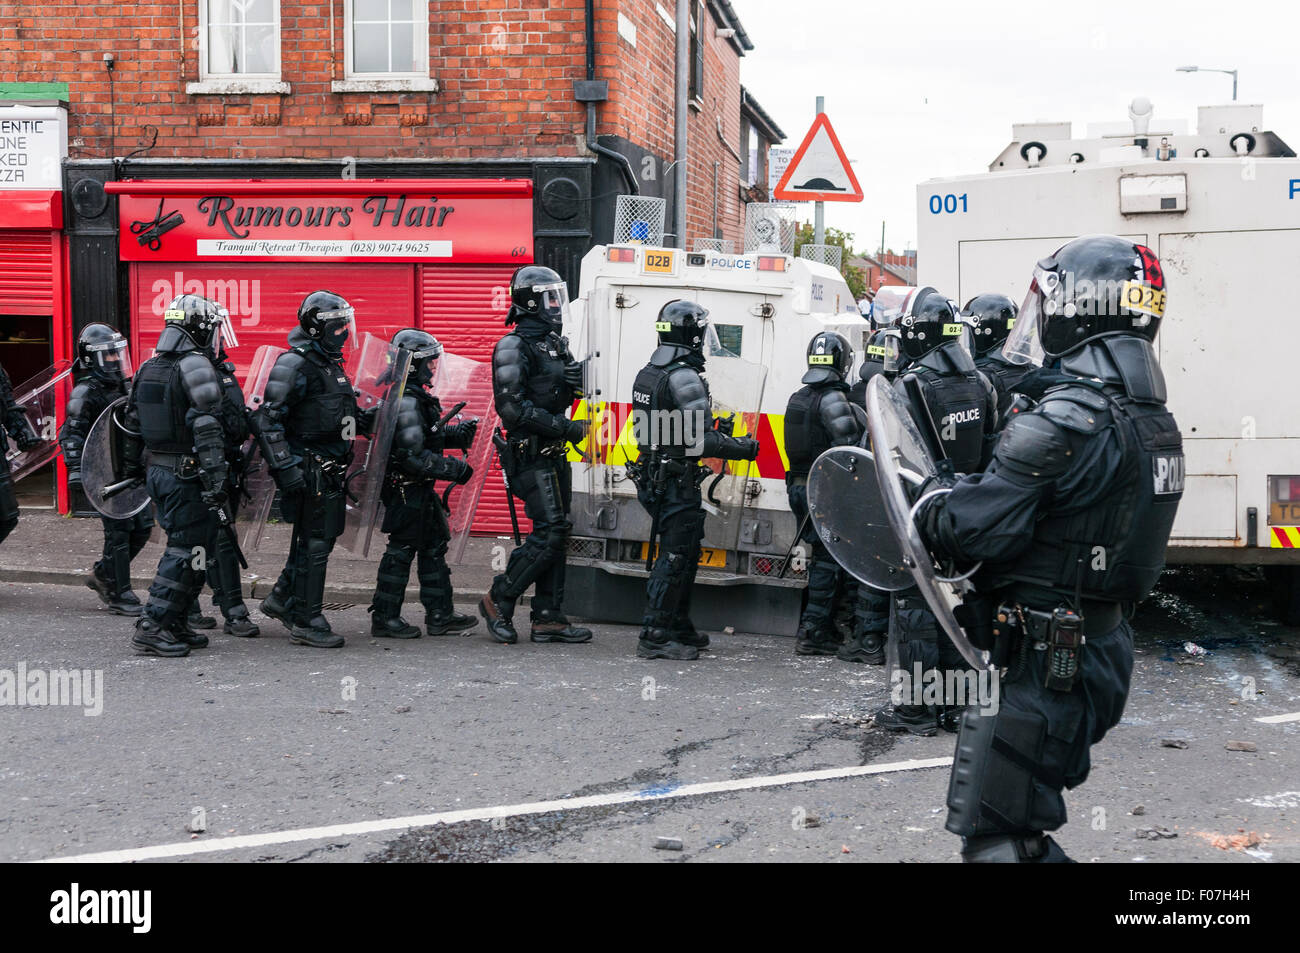 Belfast, Northern Ireland. 09 Aug 2015 - PSNI riot squad move in to kettle rioters Credit:  Stephen Barnes/Alamy Live News Stock Photo